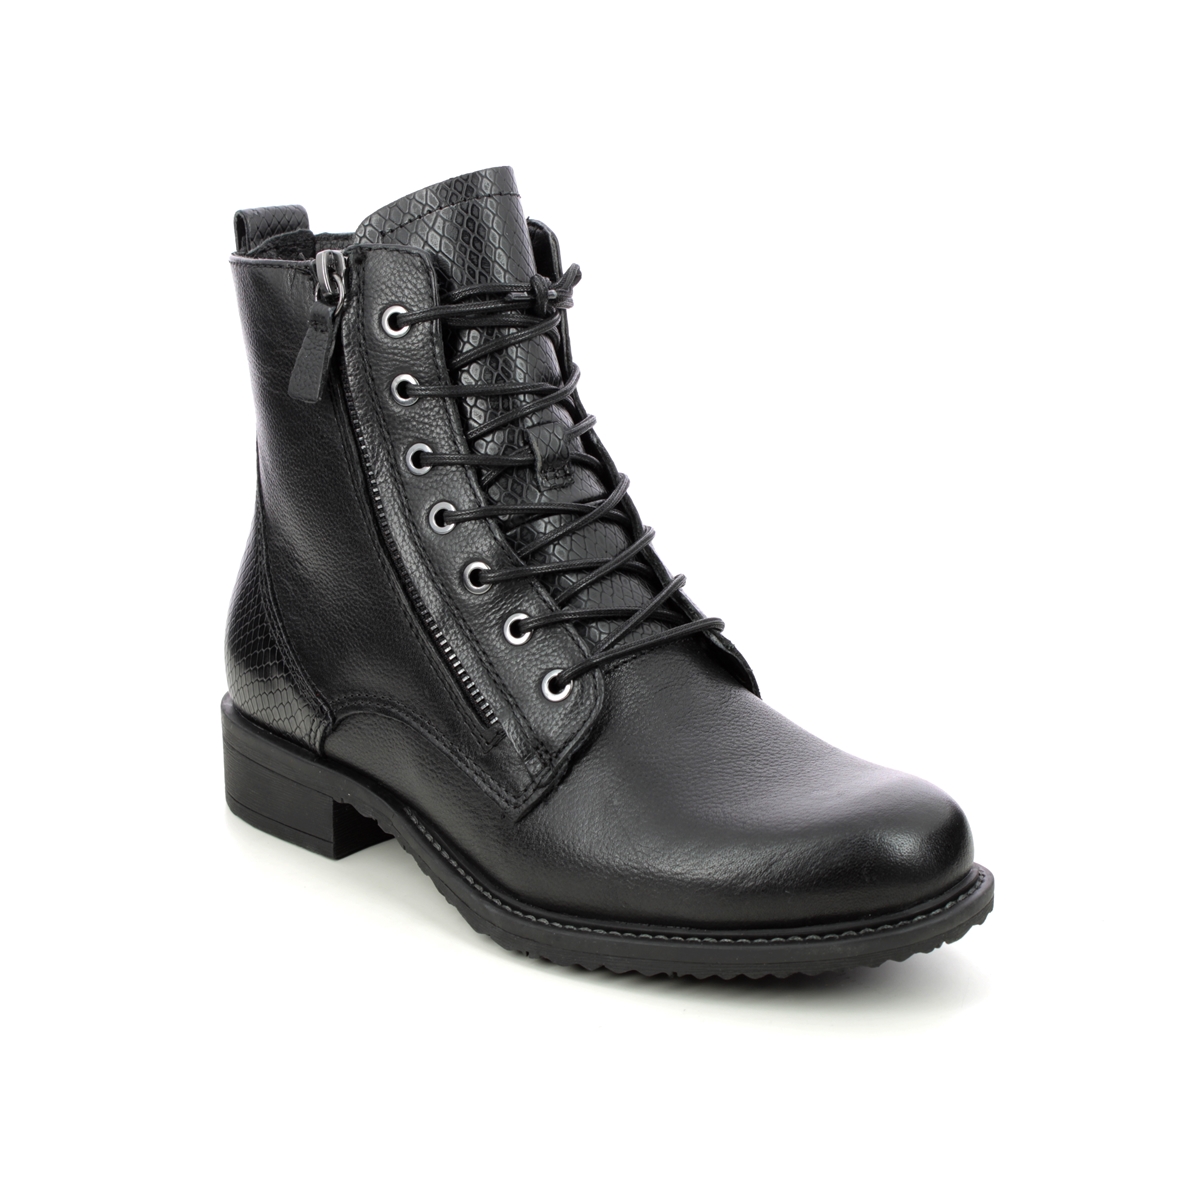 Tamaris Anouk Zip Ronja Black leather Womens Lace Up Boots 25211-29-074 in a Plain Leather and Man-made in Size 38